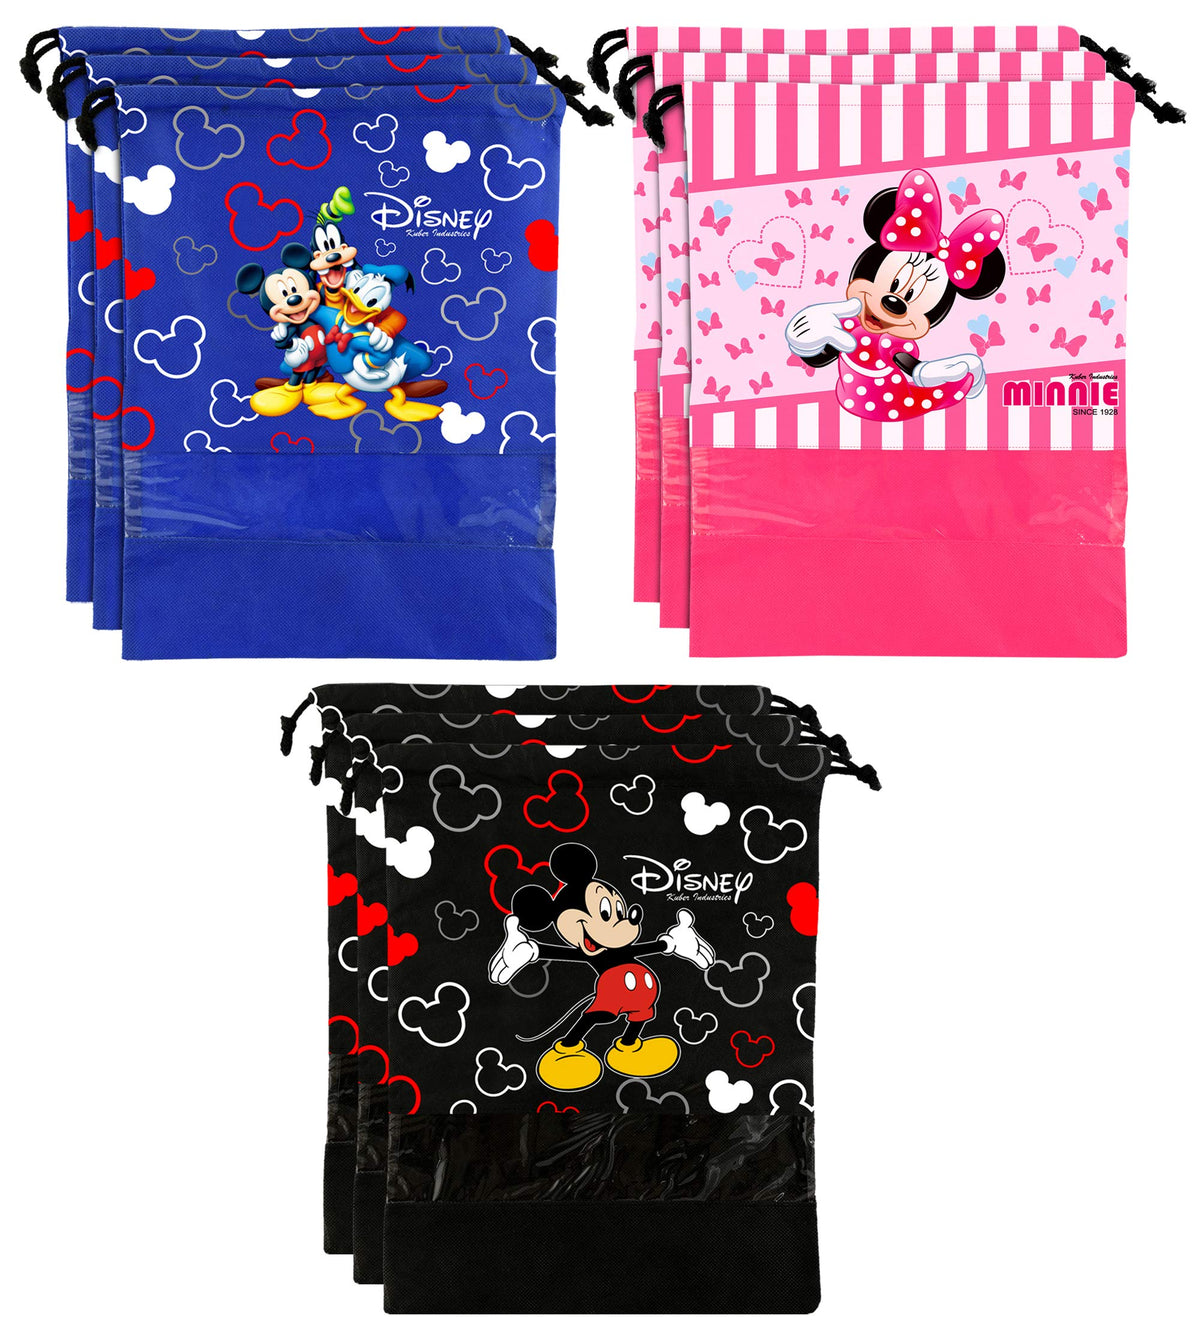 Kuber Industries Disney Print 9 Piece Non Woven Travel Shoe Cover, String Bag Organizer (Black & Royal Blue & Pink) -HS_35_LUGGAGE18035